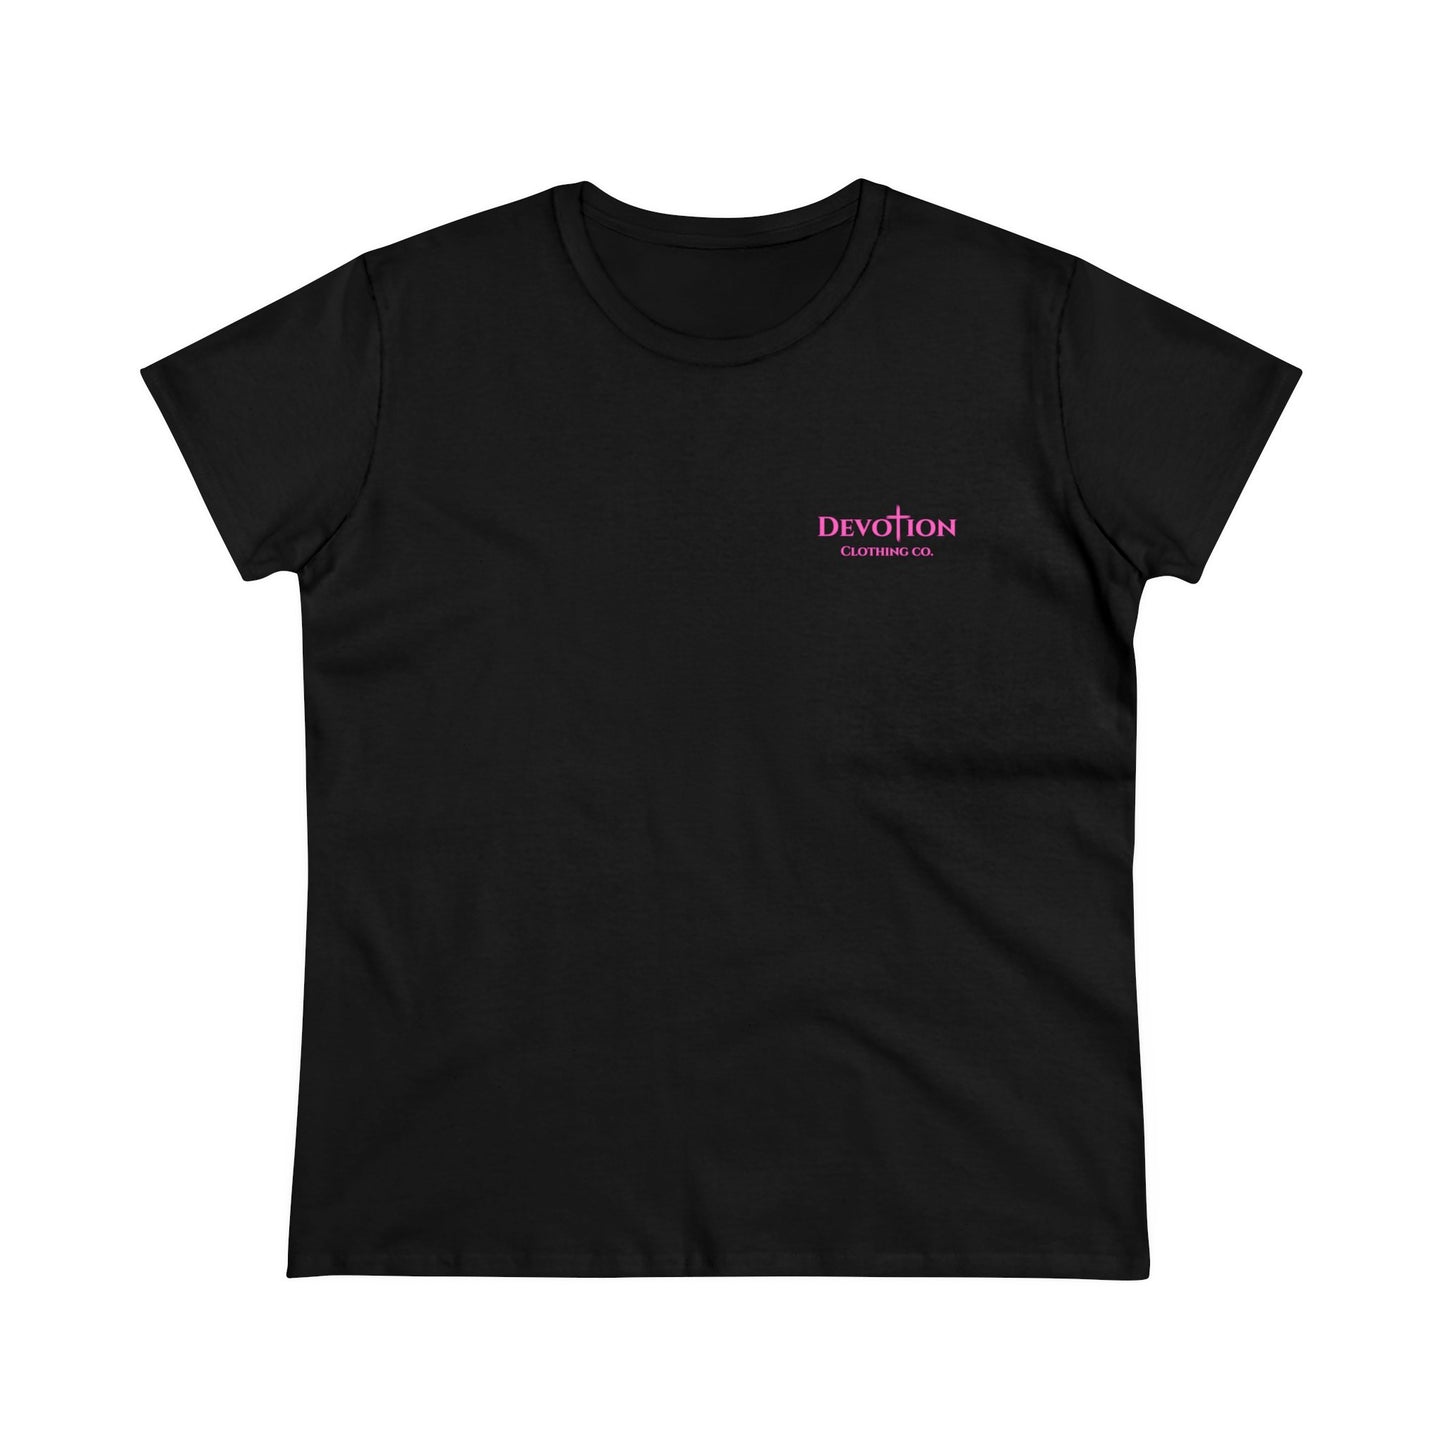 Powered By Faith Women's Fitted Tee